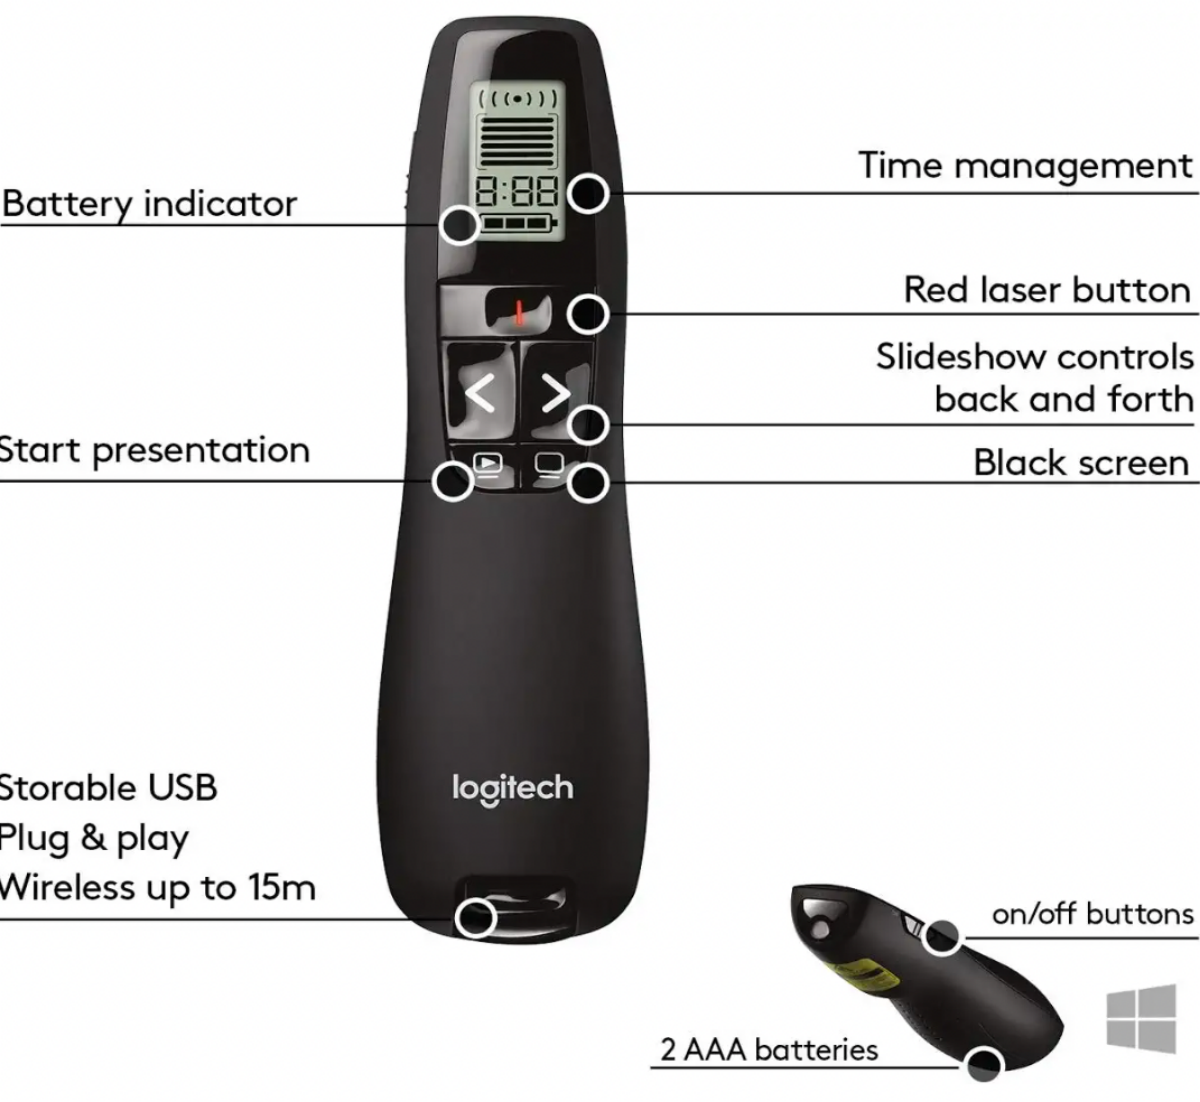 A full shot of a Logitech Professional Presenter R800 illustrating all the controls